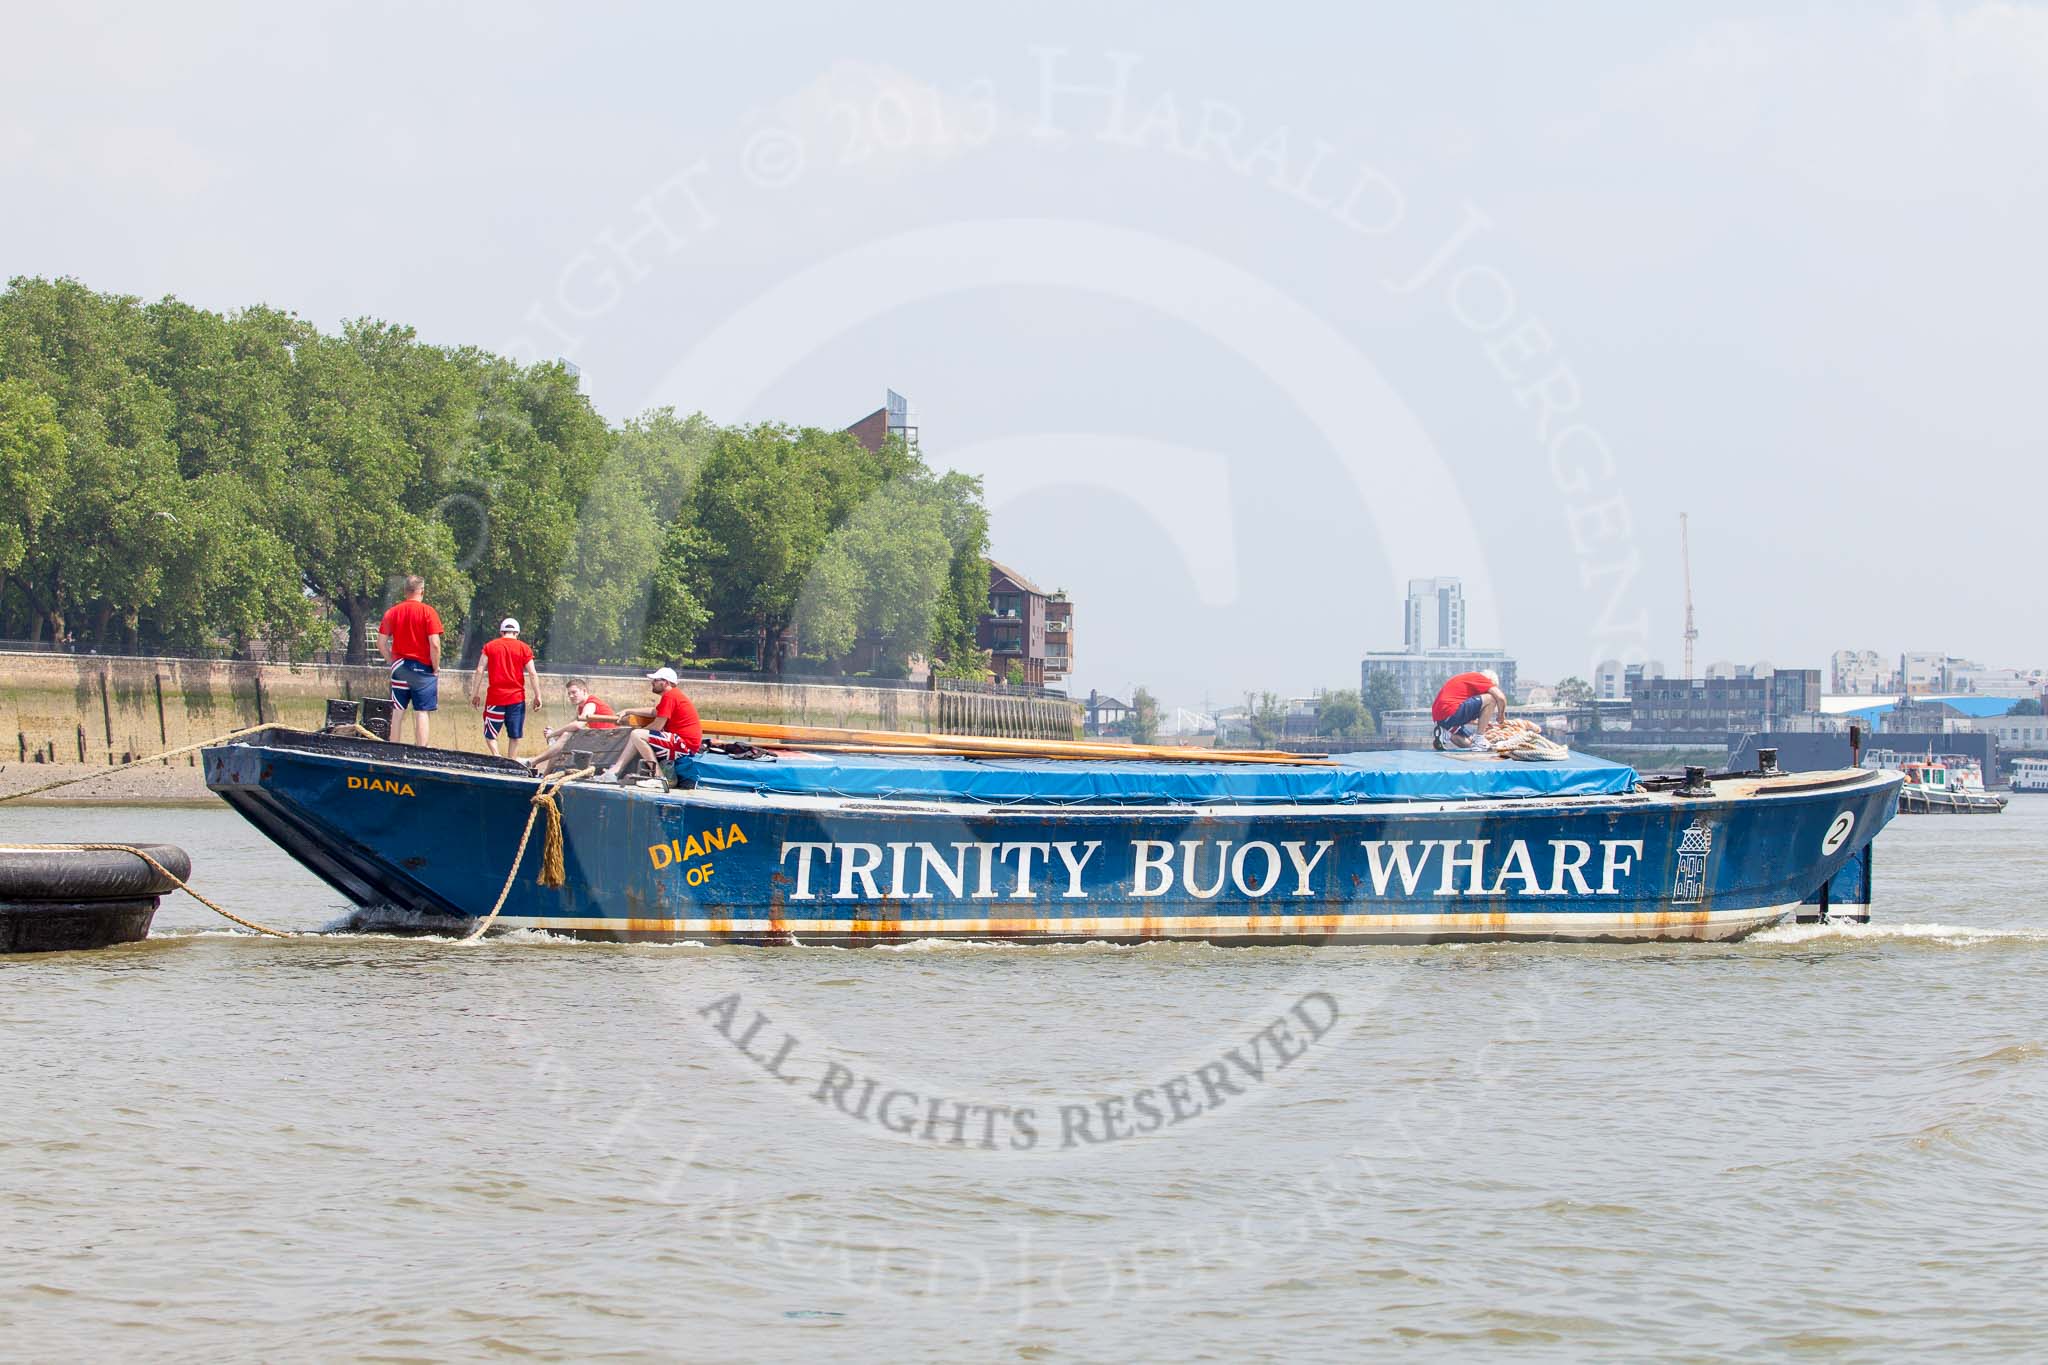 TOW River Thames Barge Driving Race 2013: Barge "Diana", by Trinity Buoy Wharf, before the start of the race..
River Thames between Greenwich and Westminster,
London,

United Kingdom,
on 13 July 2013 at 12:03, image #46